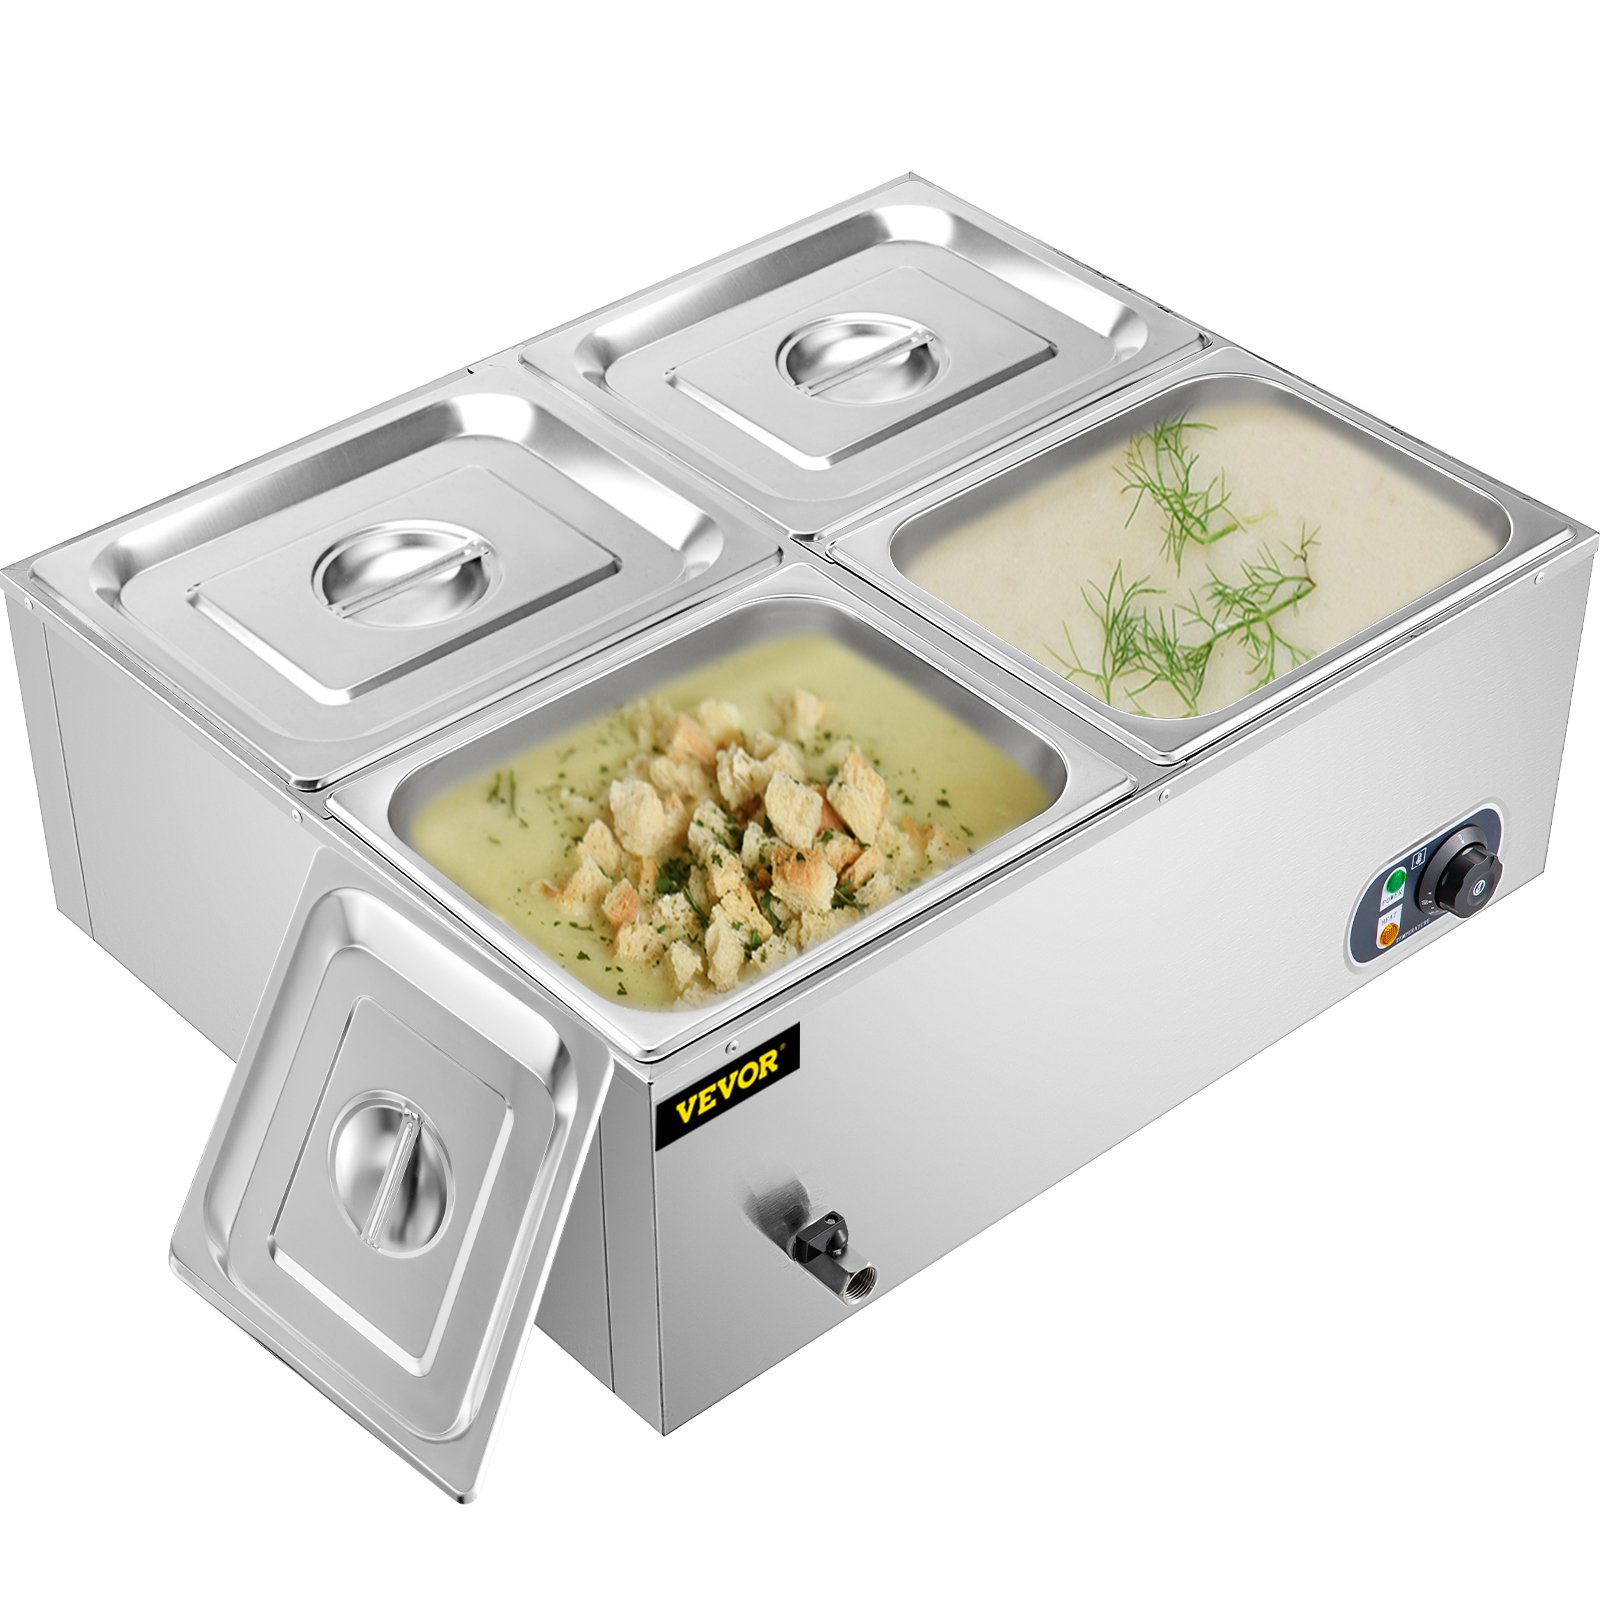 VEVOR 110V 4-Pan Commercial Food Warmer, 1200W Electric Steam Table  15cm/6inch Deep, Professional Stainless Steel Buffet Bain Marie 34 Quart  for Catering and Restaurants